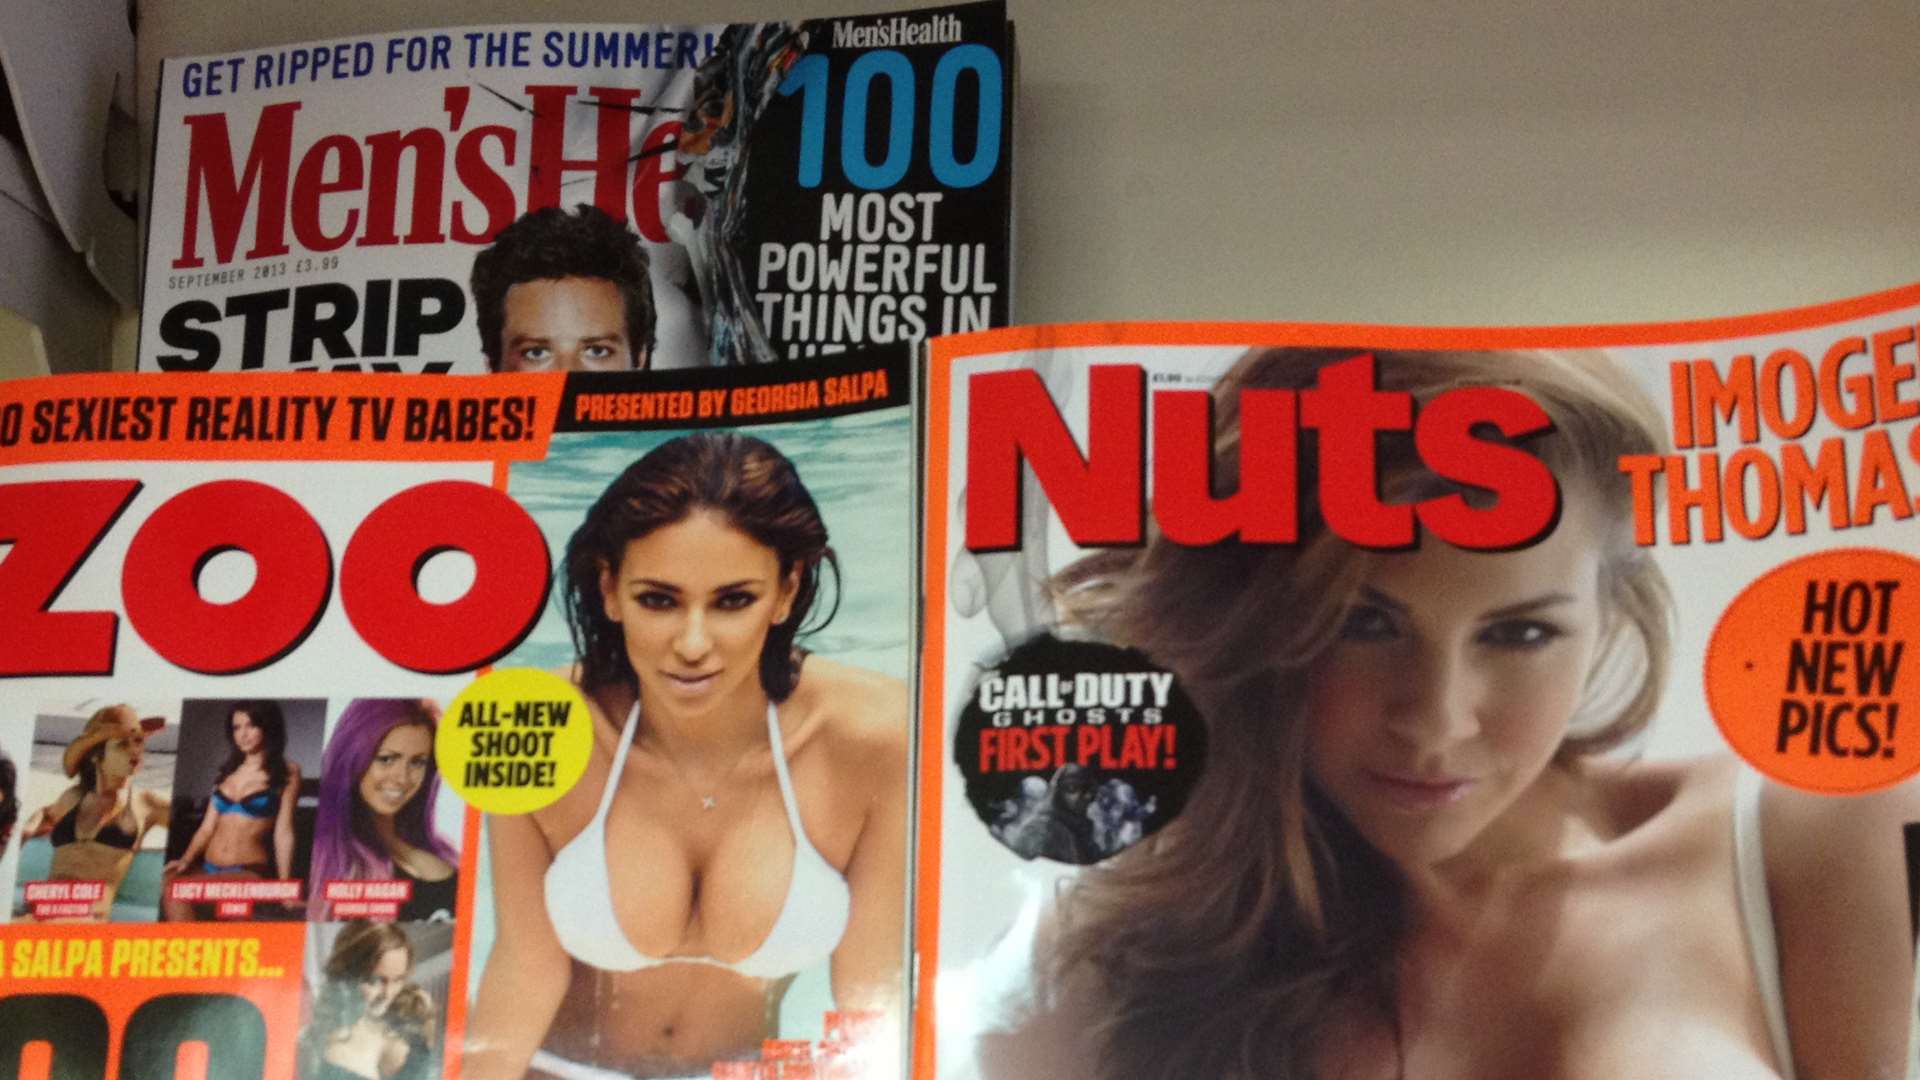 Zoo and Nuts are among the mags campaigners are protesting about